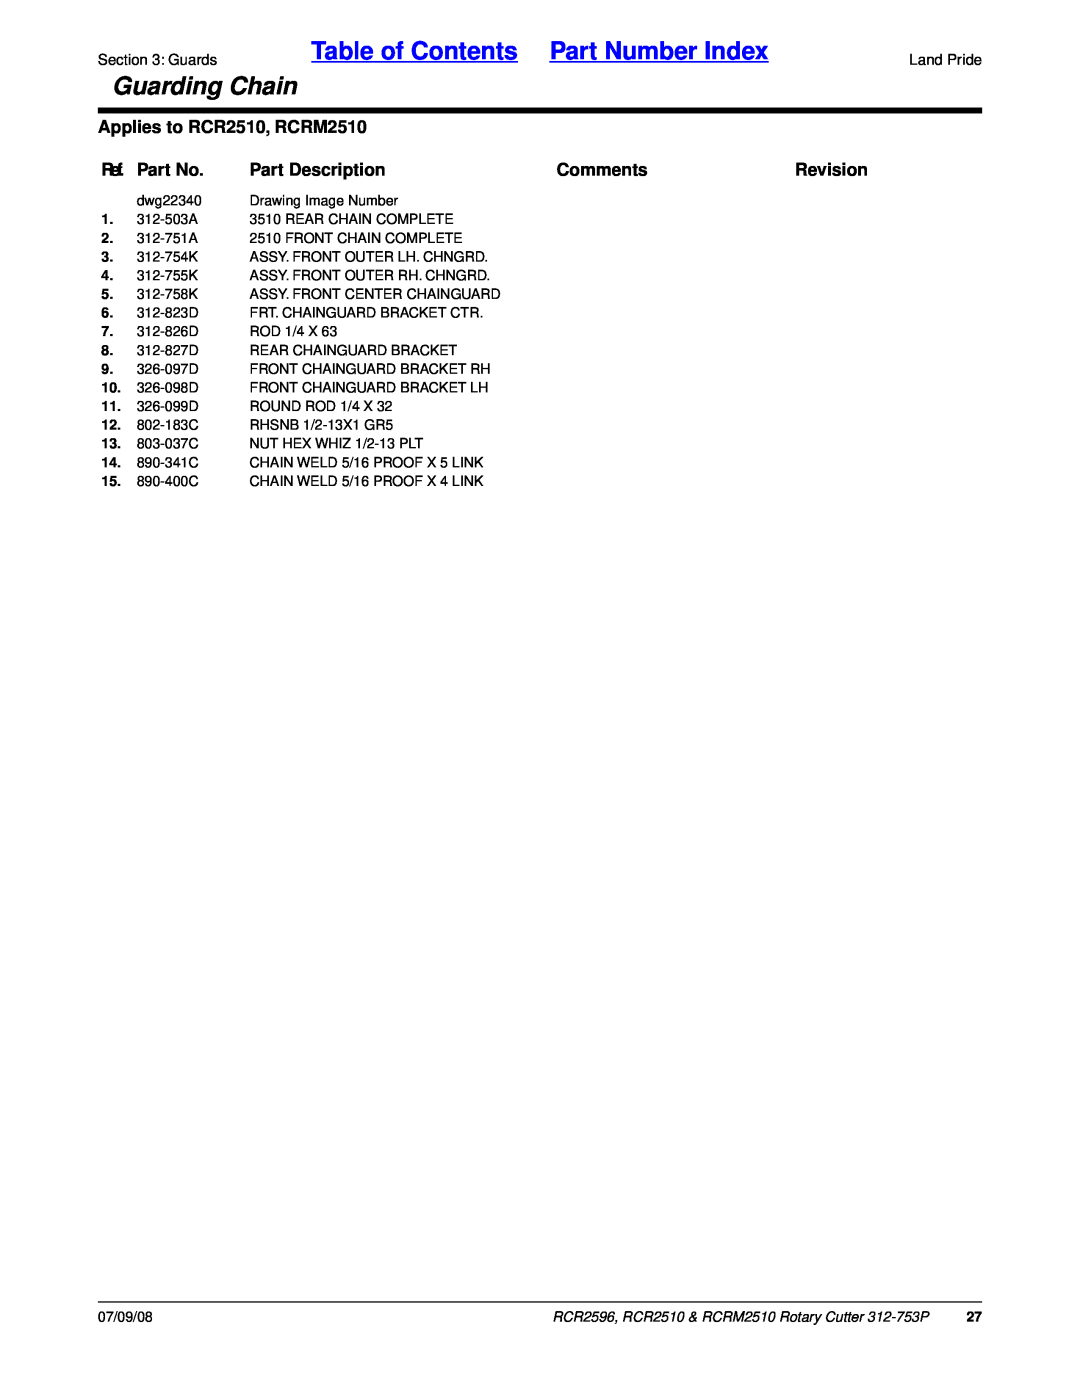 Land Pride RCR2596 manual Table of Contents Part Number Index, Guarding Chain, Applies to RCR2510, RCRM2510, Ref. Part No 